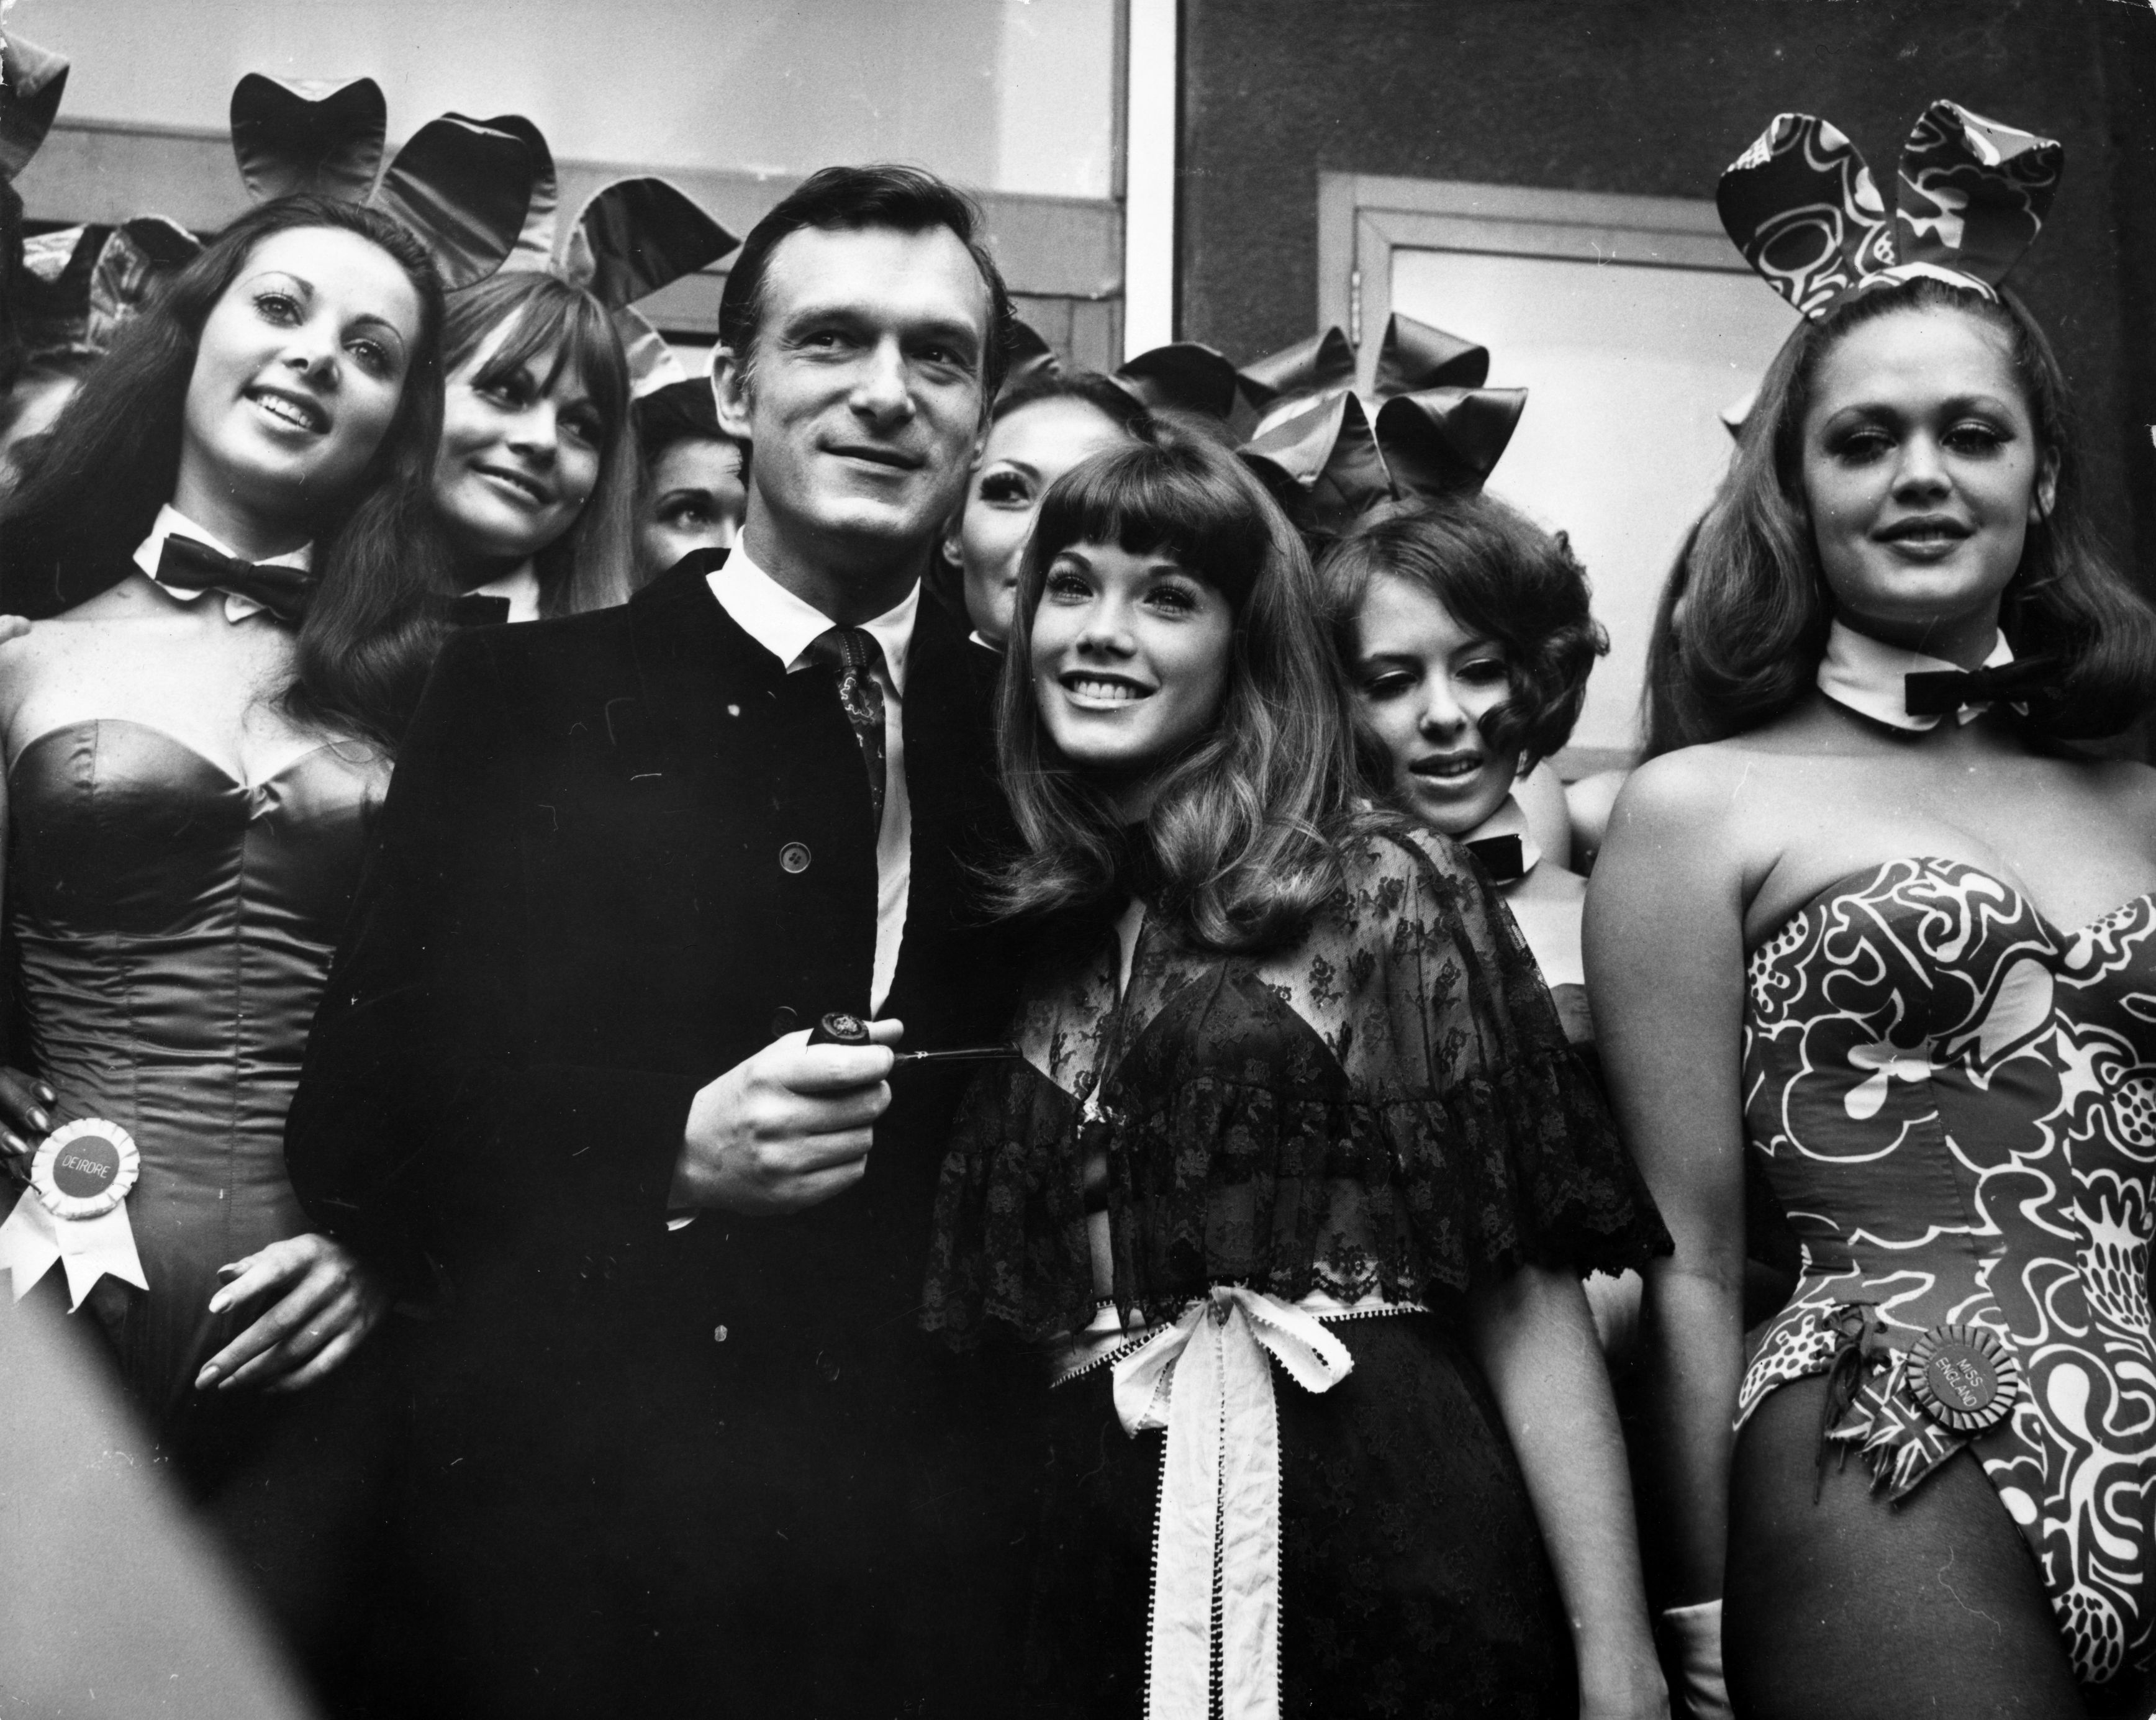 Sedatives, orgies and bestiality The documentary that shines a light on historical abuse at Hugh Hefners Playboy mansion pic